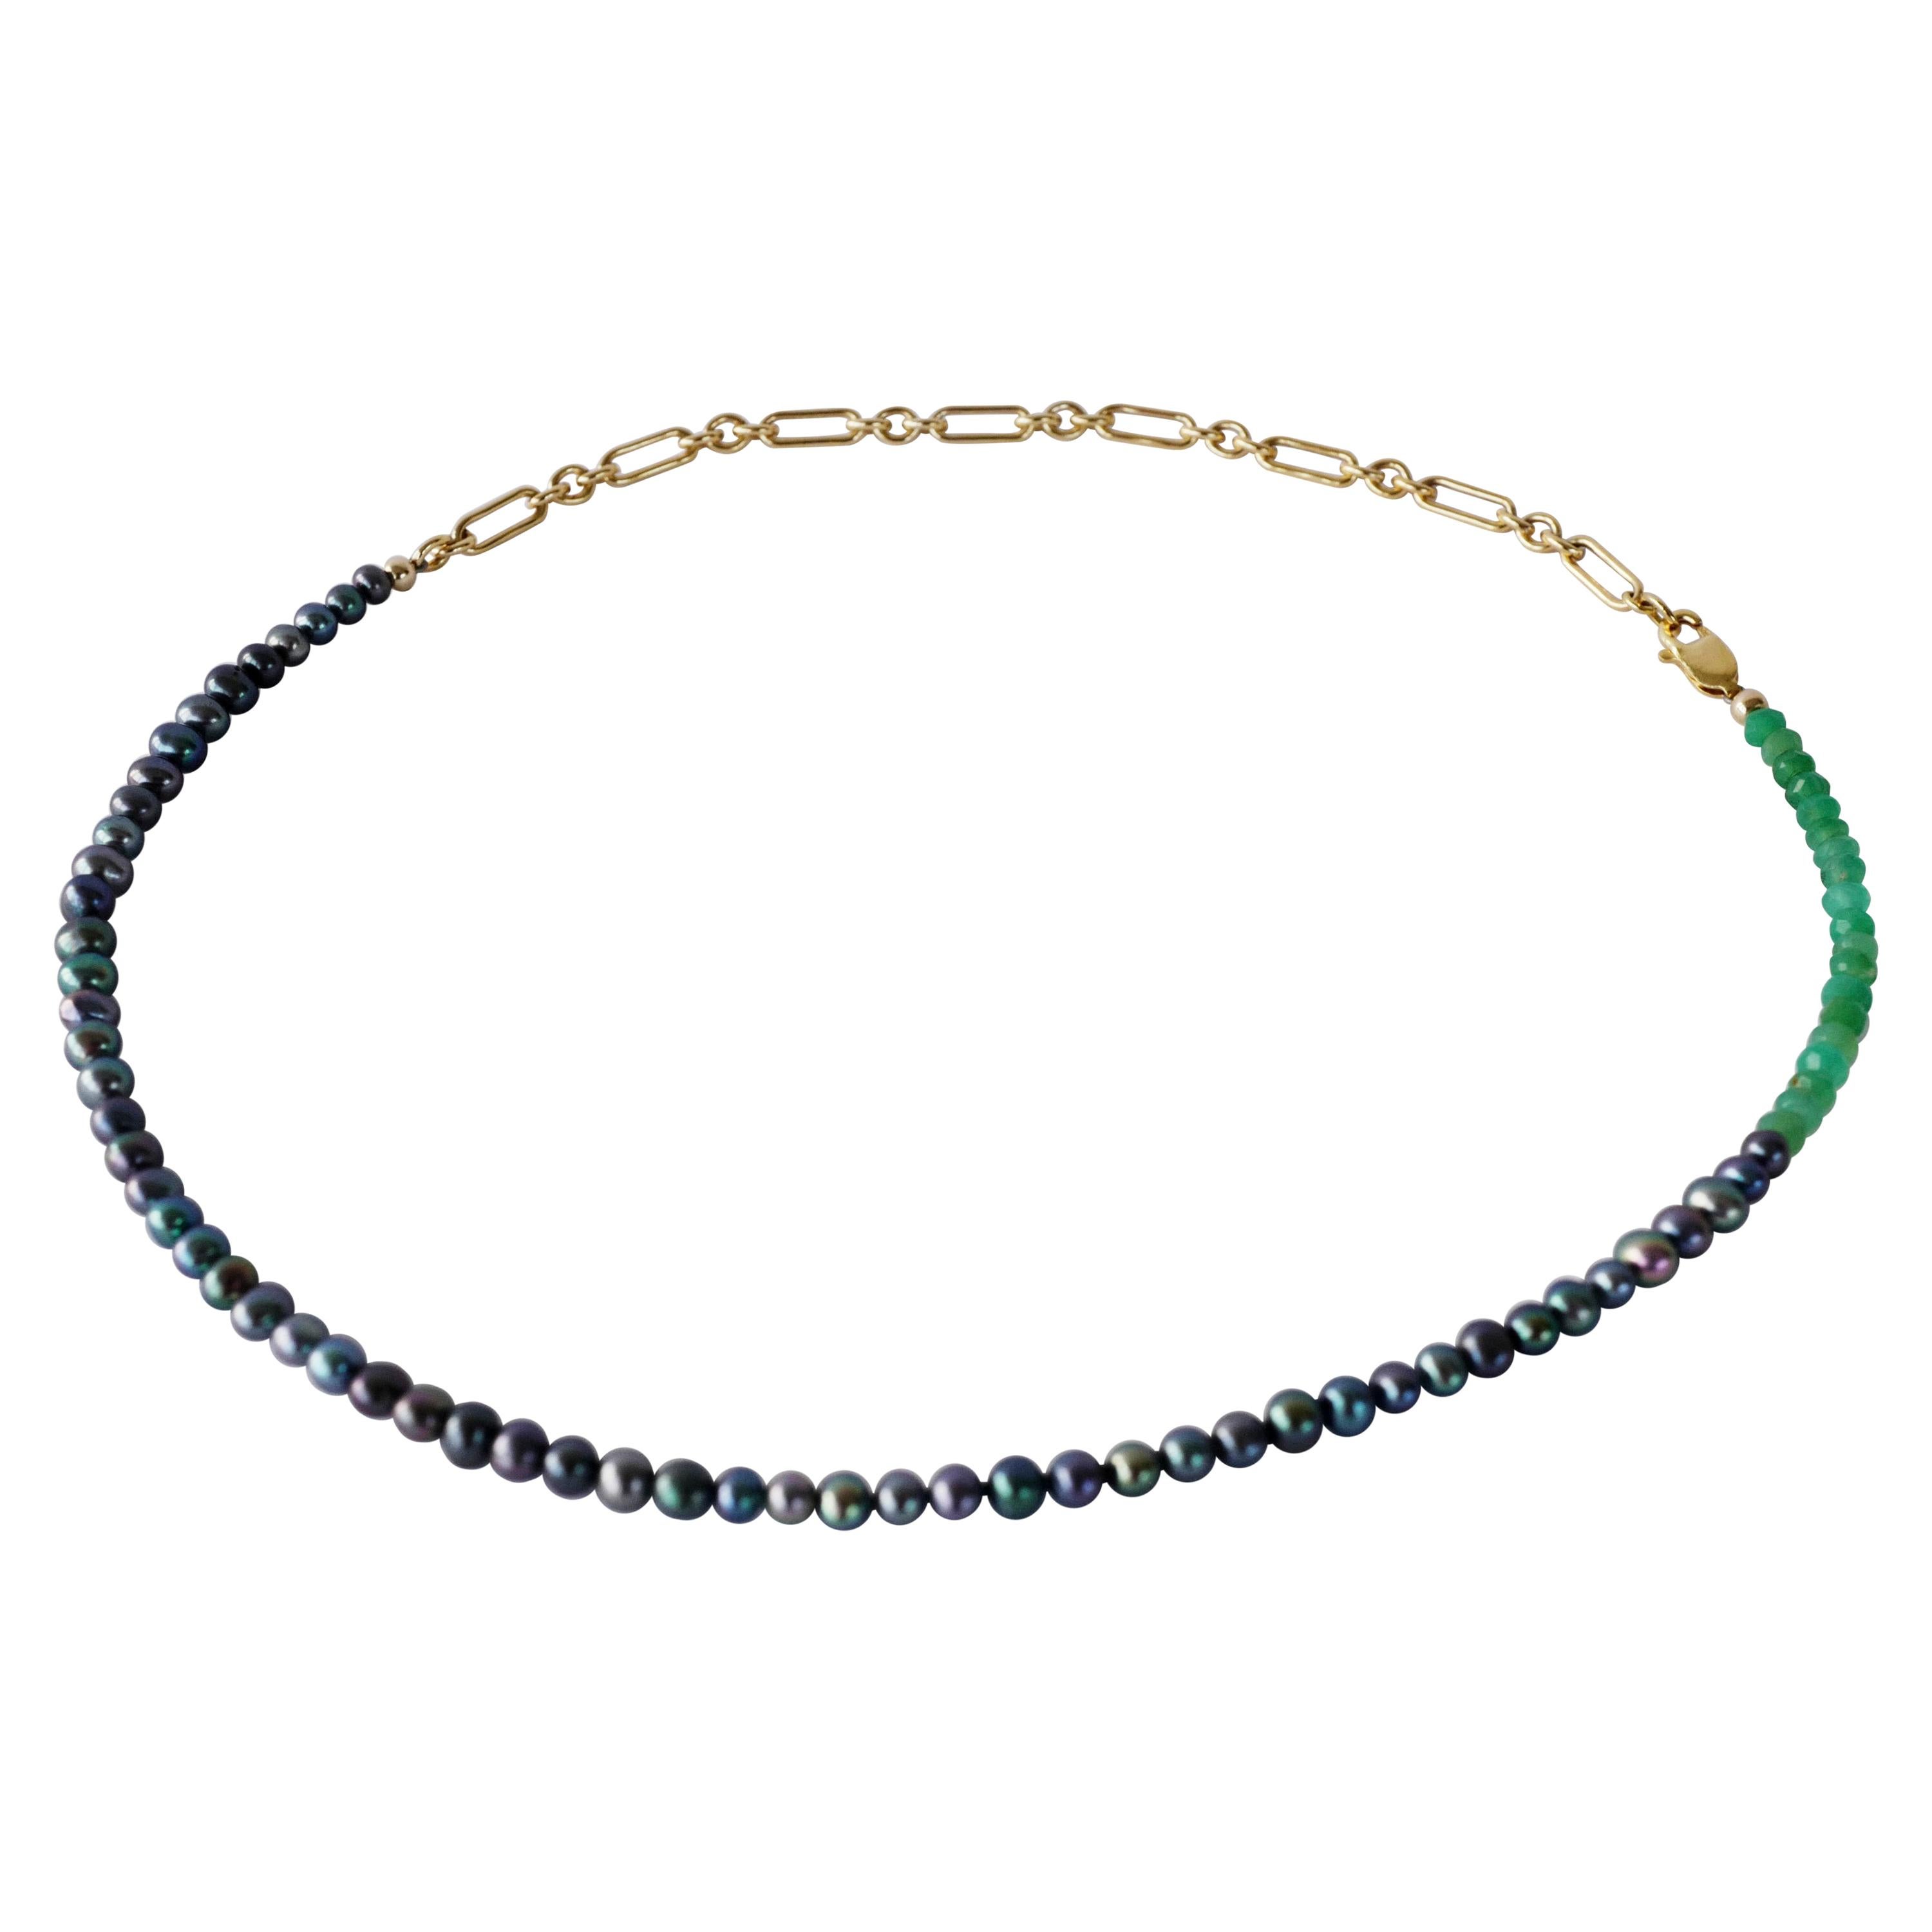 Romantic Black Pearl Green Chrysoprase Gold Filled Chain Beaded Choker Necklace J Dauphin For Sale